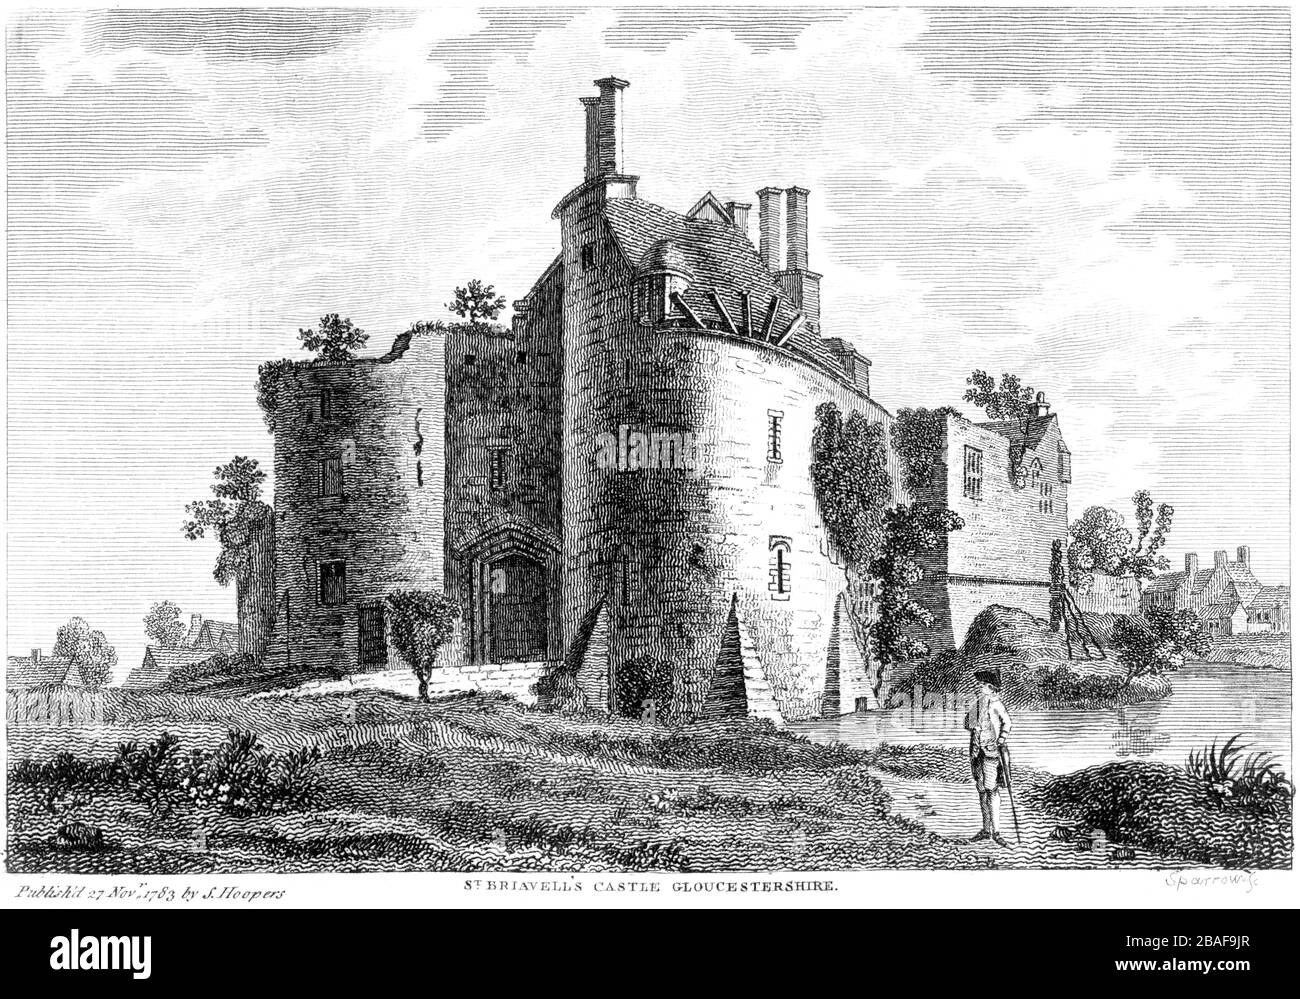 Engraving of St Briavells Castle 1783 (St Briavels) Gloucestershire scanned at high res from a book published around 1786. Believed copyright free. Stock Photo